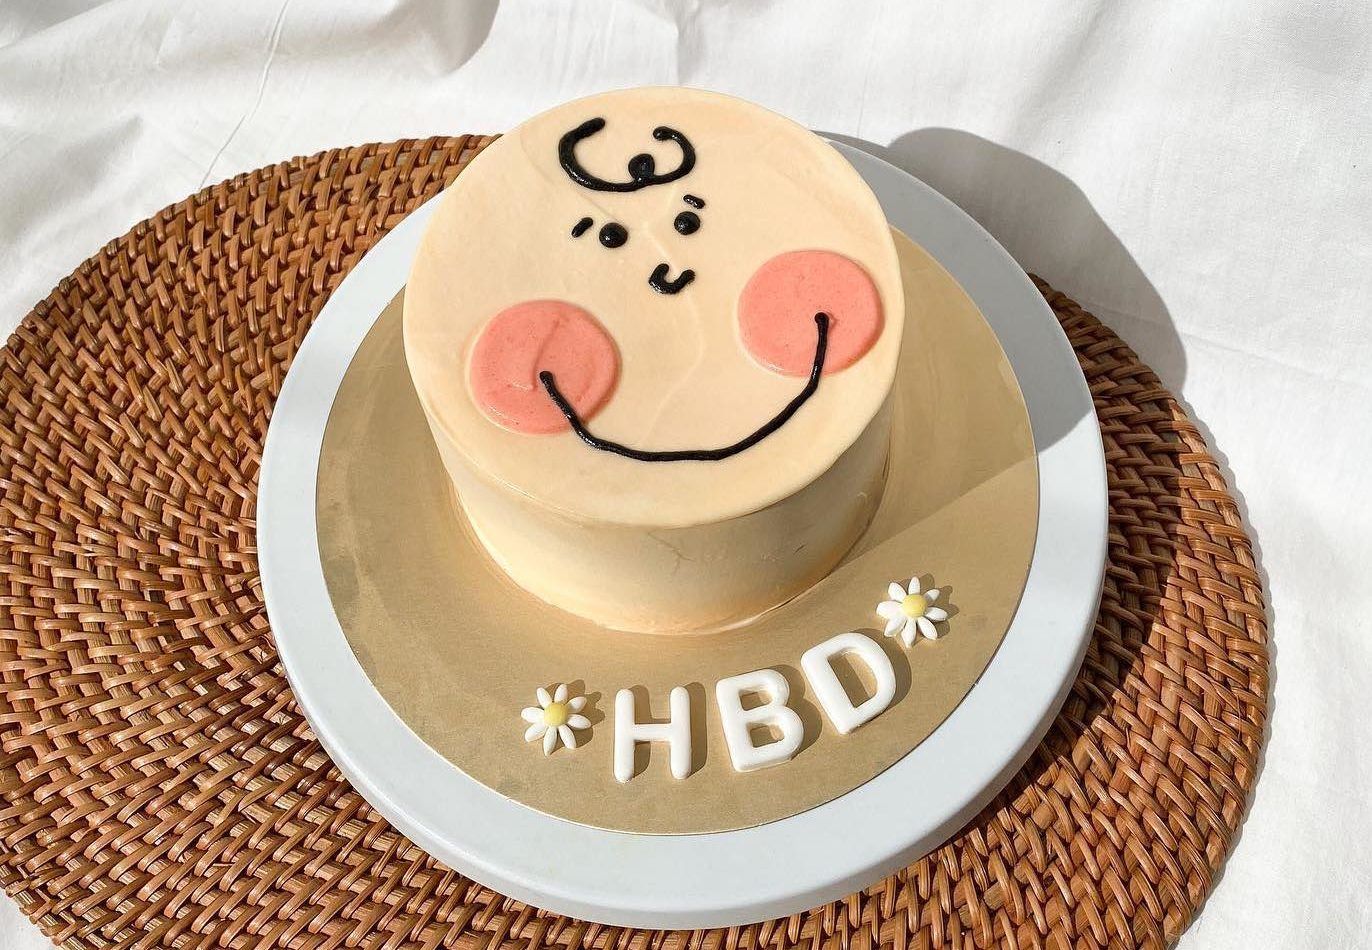 15 Adorable First Birthday Cake Ideas That You Will Love - Find Your Cake  Inspiration